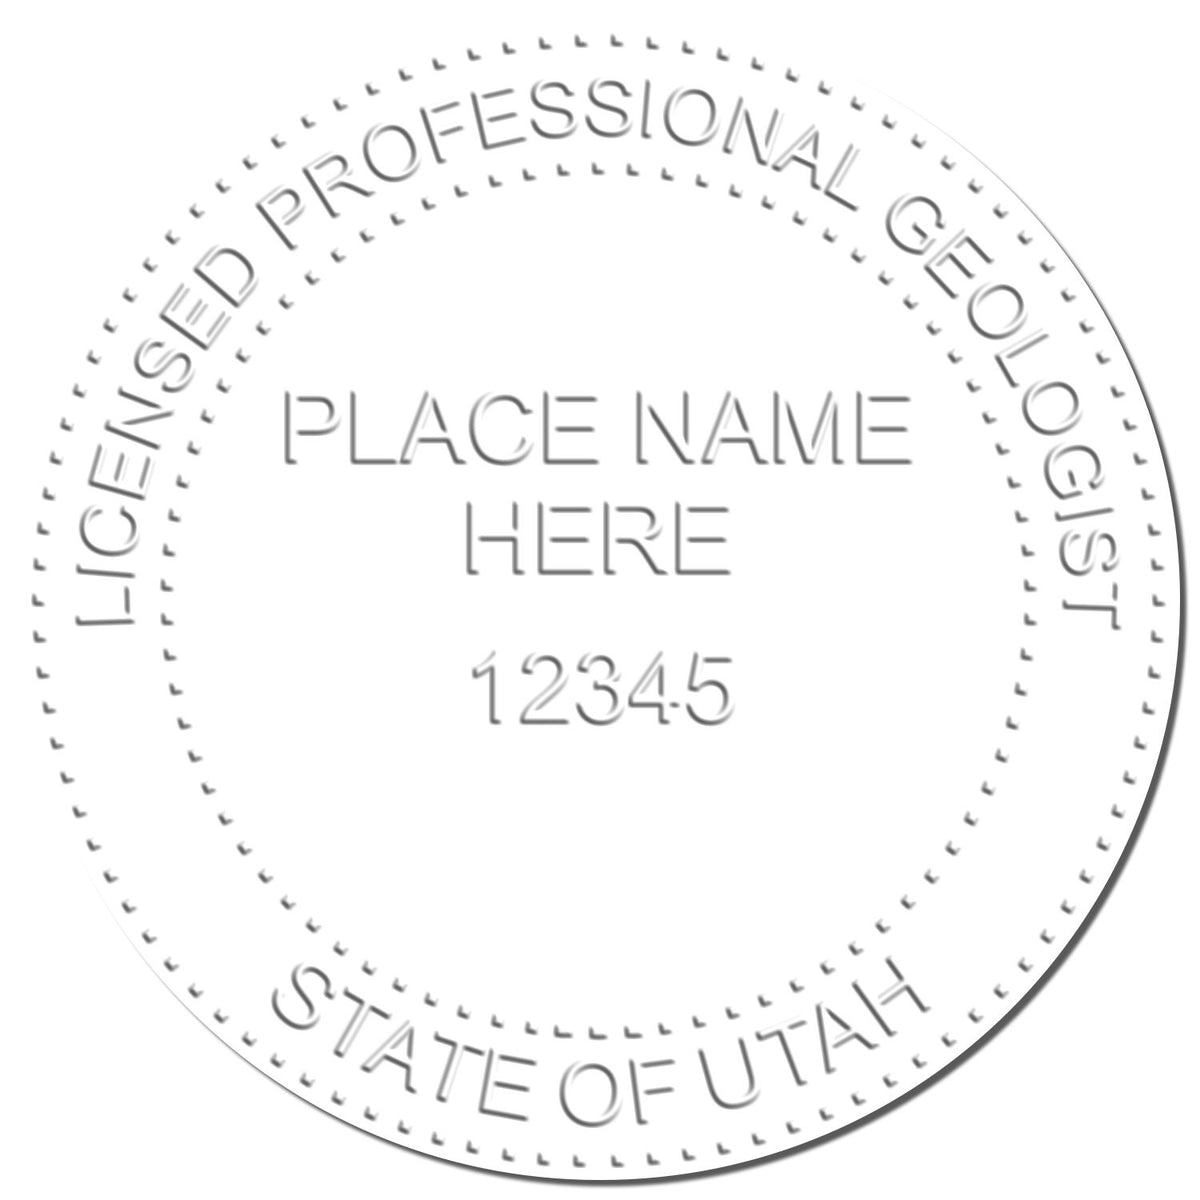 A photograph of the Hybrid Utah Geologist Seal stamp impression reveals a vivid, professional image of the on paper.